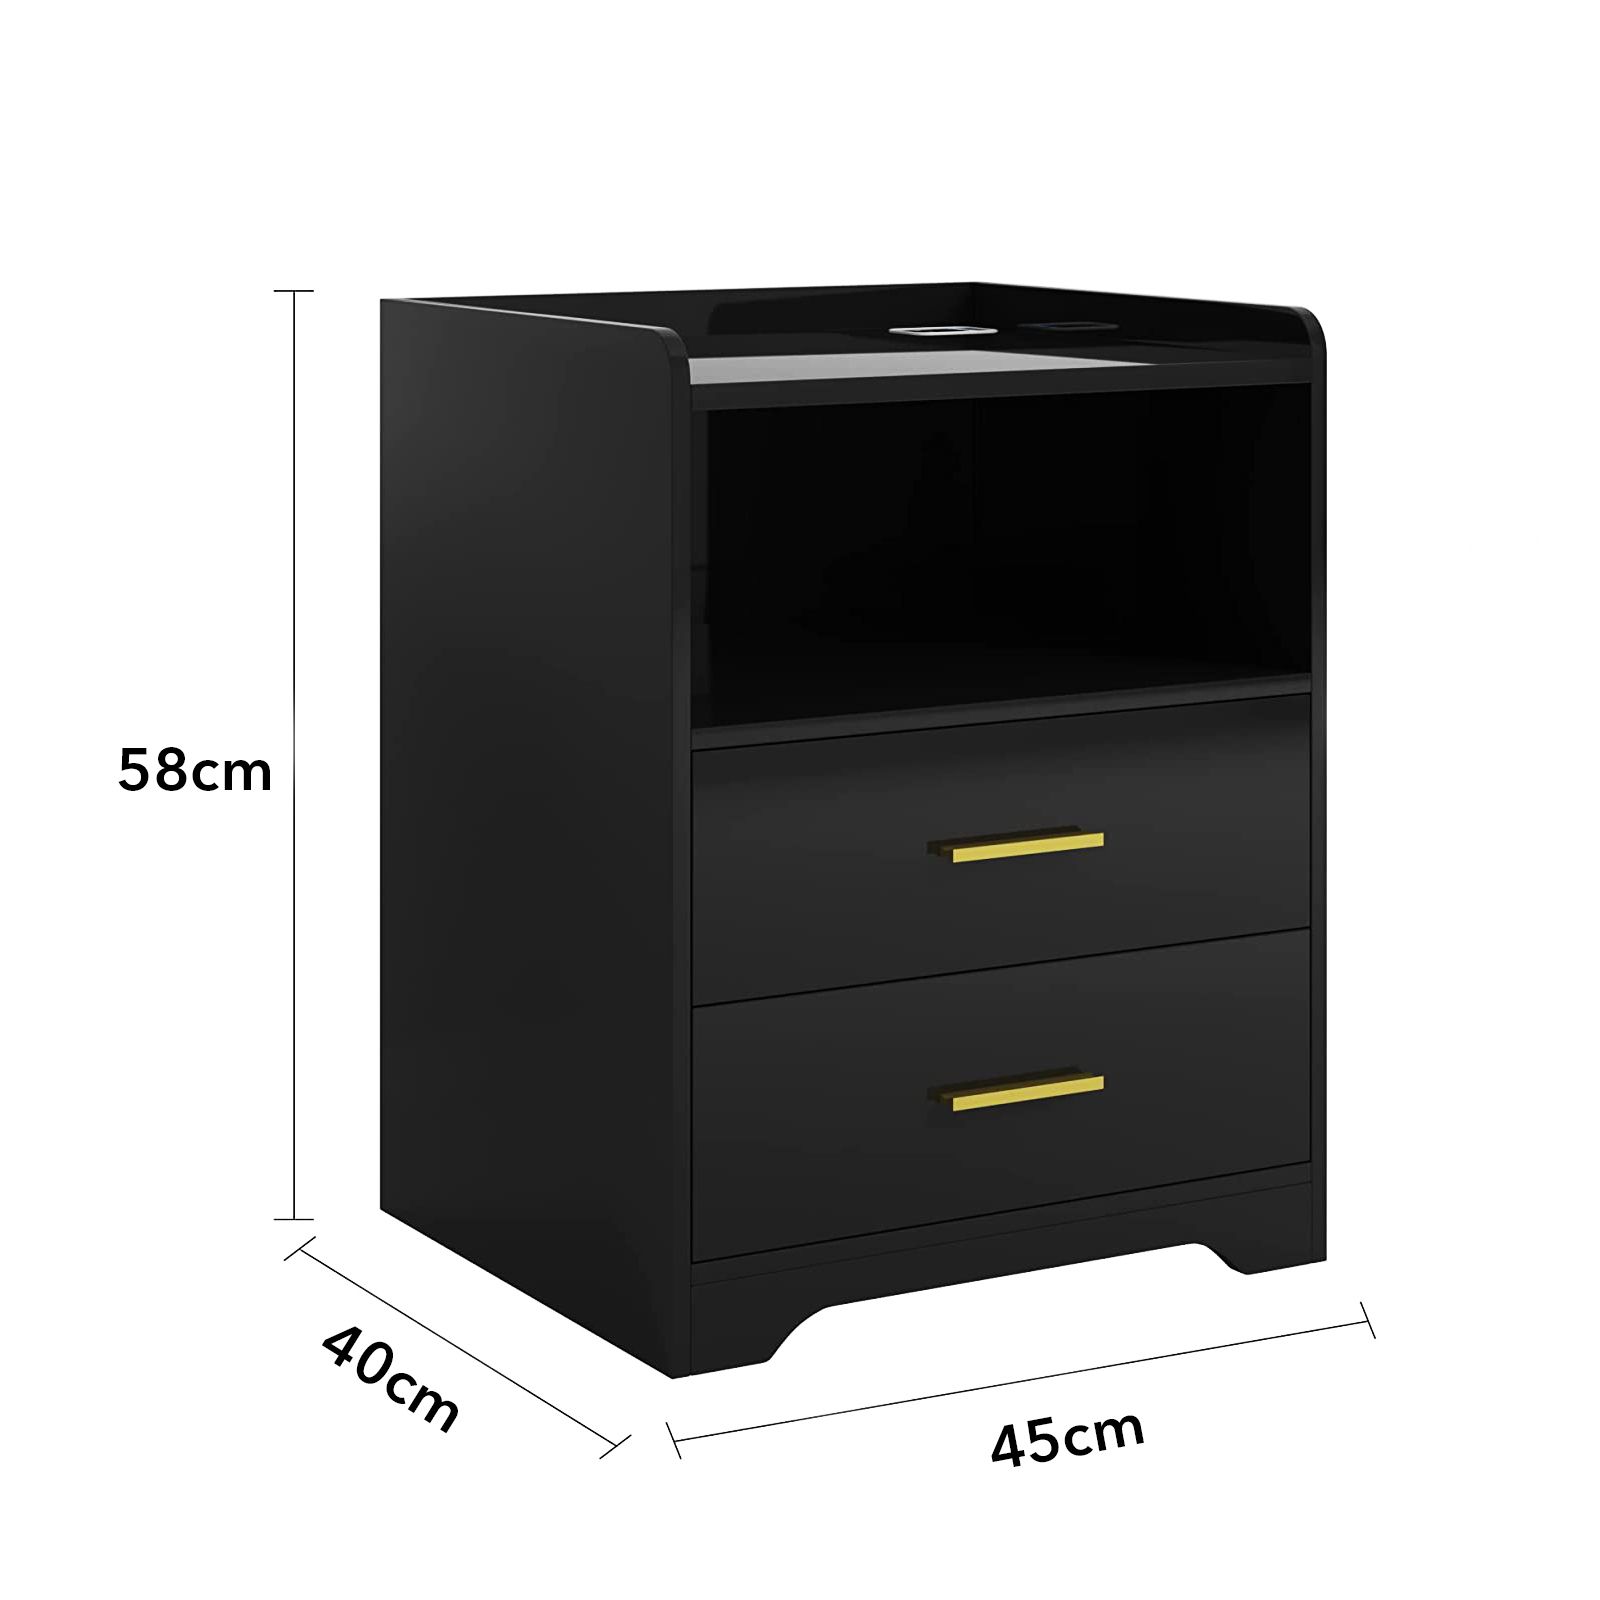 Luxsuite Smart Bedside Table Black LED Side End Nightstand Sofa Storage Cabinet Bedroom Modern Full High Gloss Finish 2 Drawers 2 Open Shelves 2 USB Ports Human Induction